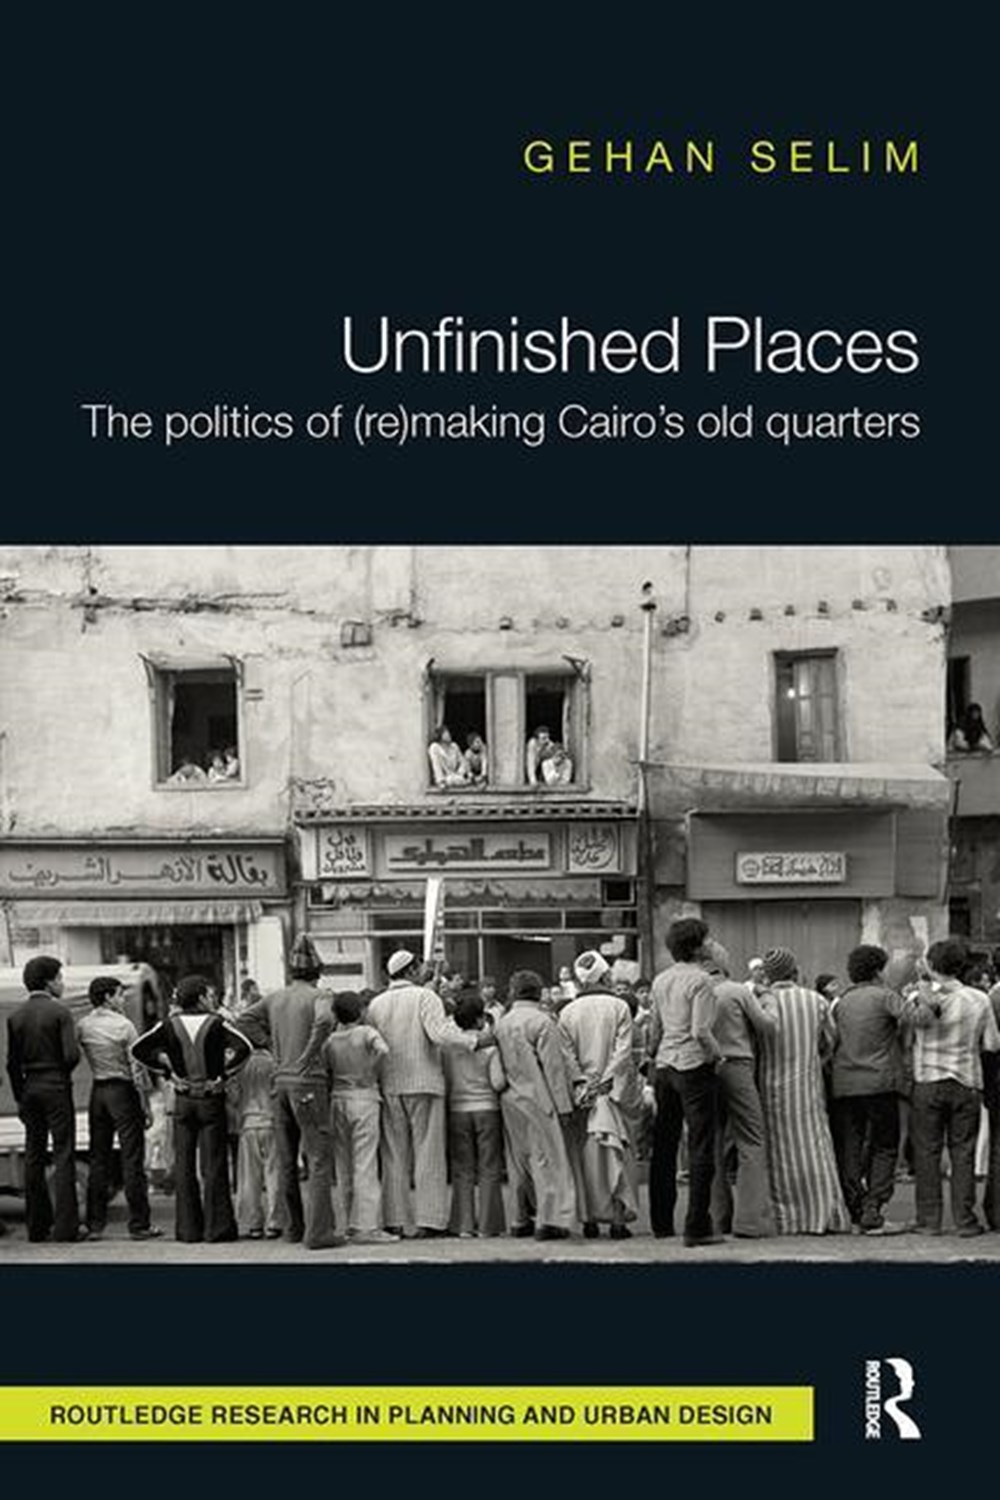 Unfinished Places: The Politics of (Re)Making Cairo's Old Quarters